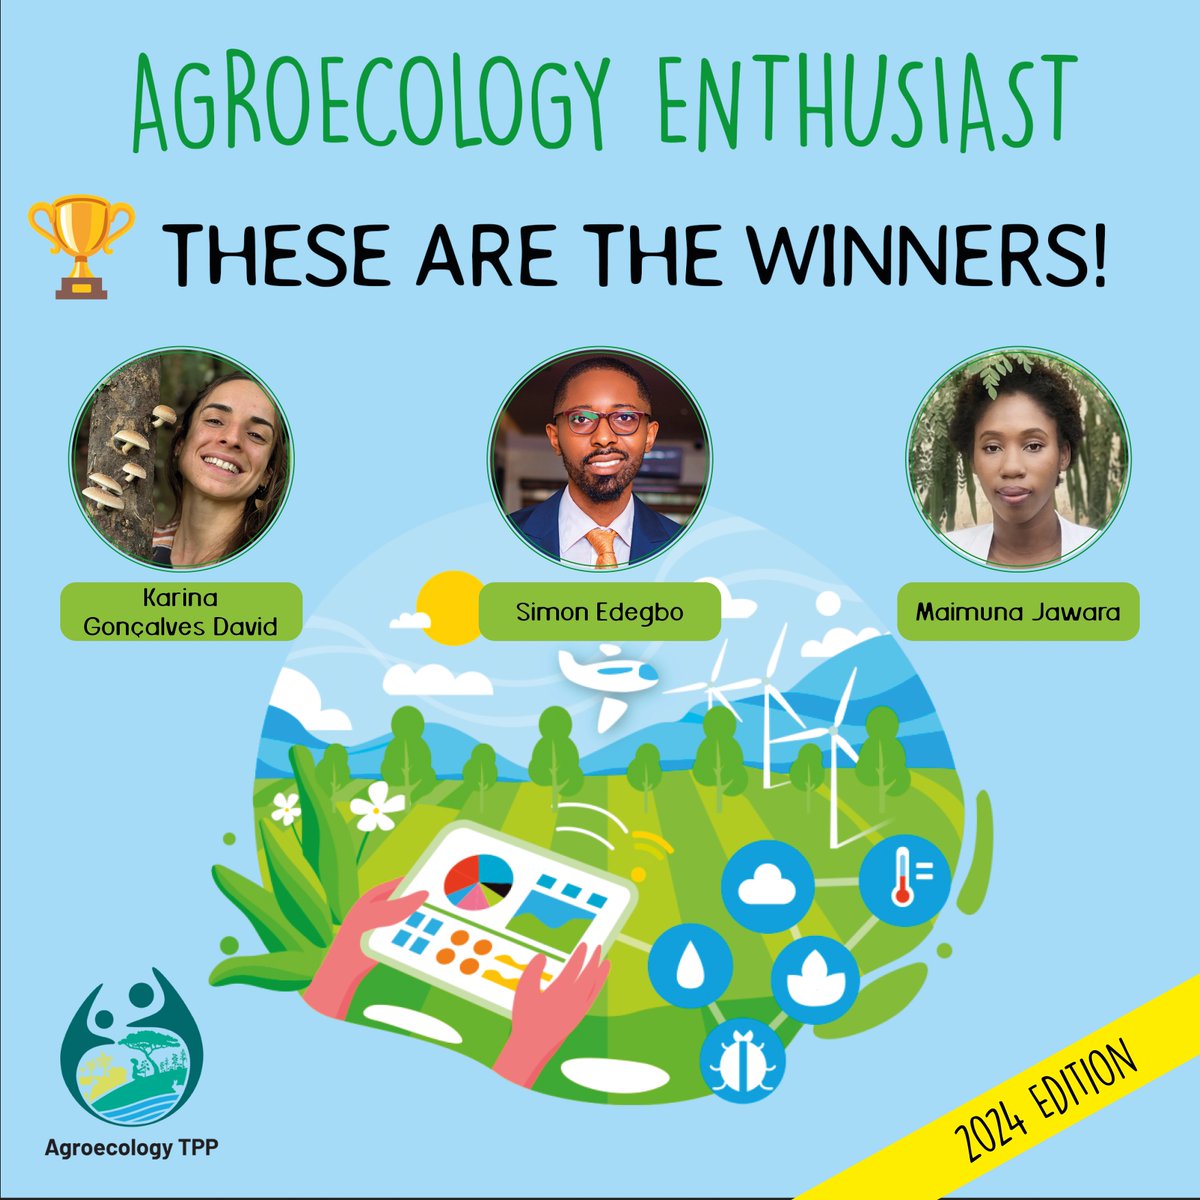 Meet the winners!

The agroecology TPP has announced the winners of the Agroecology contest, 2024 edition.

Simon Edegbo, Karina Goncales David and Maimuna Jawara.

They will be attending the Agroecology TPP event in Nairobi on 12th and 13th March.

Congatulations!

#aeTPP